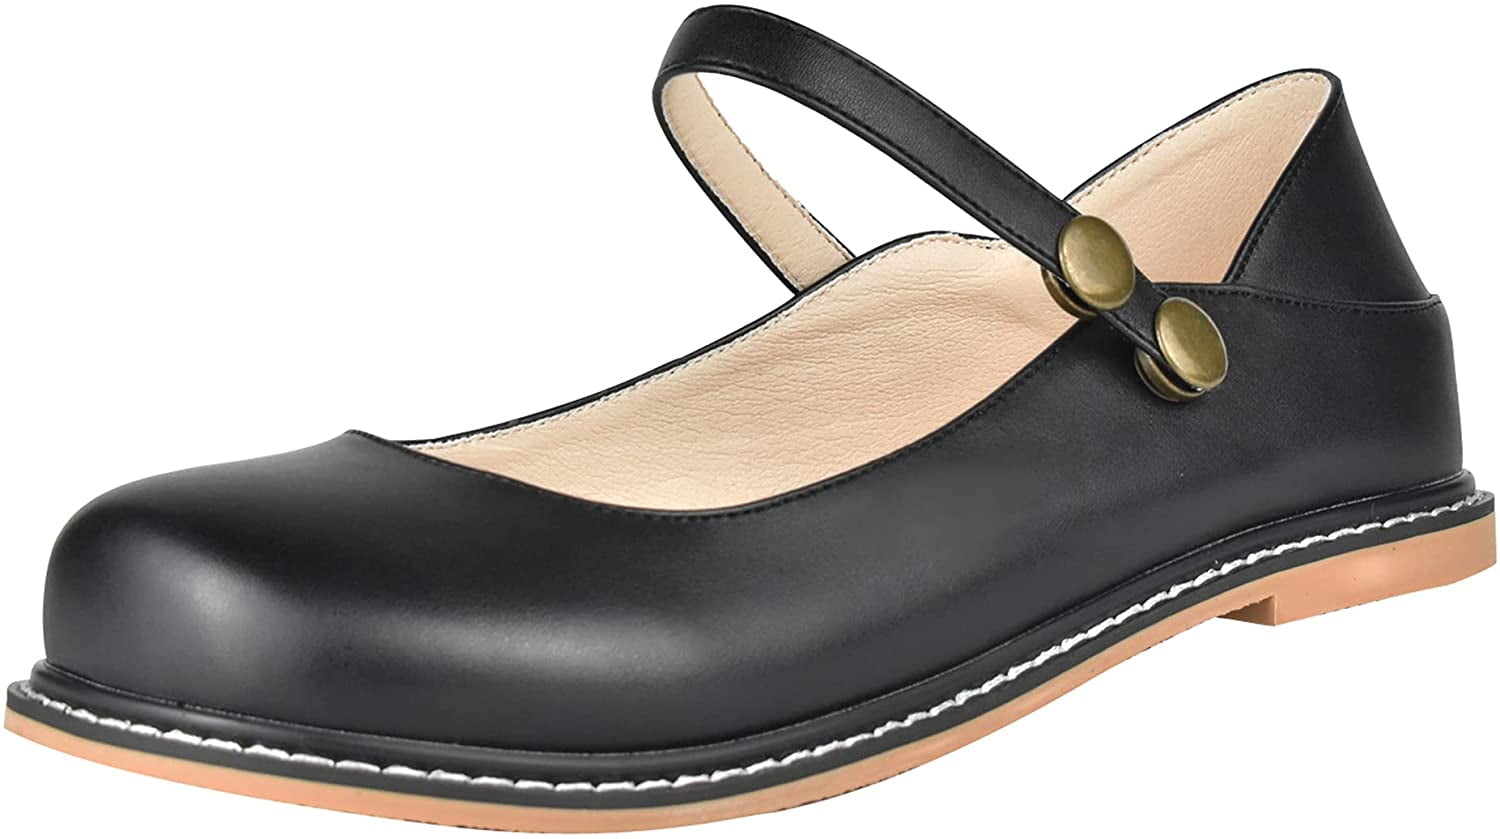 100FIXEO Women Ankle Strap Mary Janes Patent Leather Casual Ballet Flats